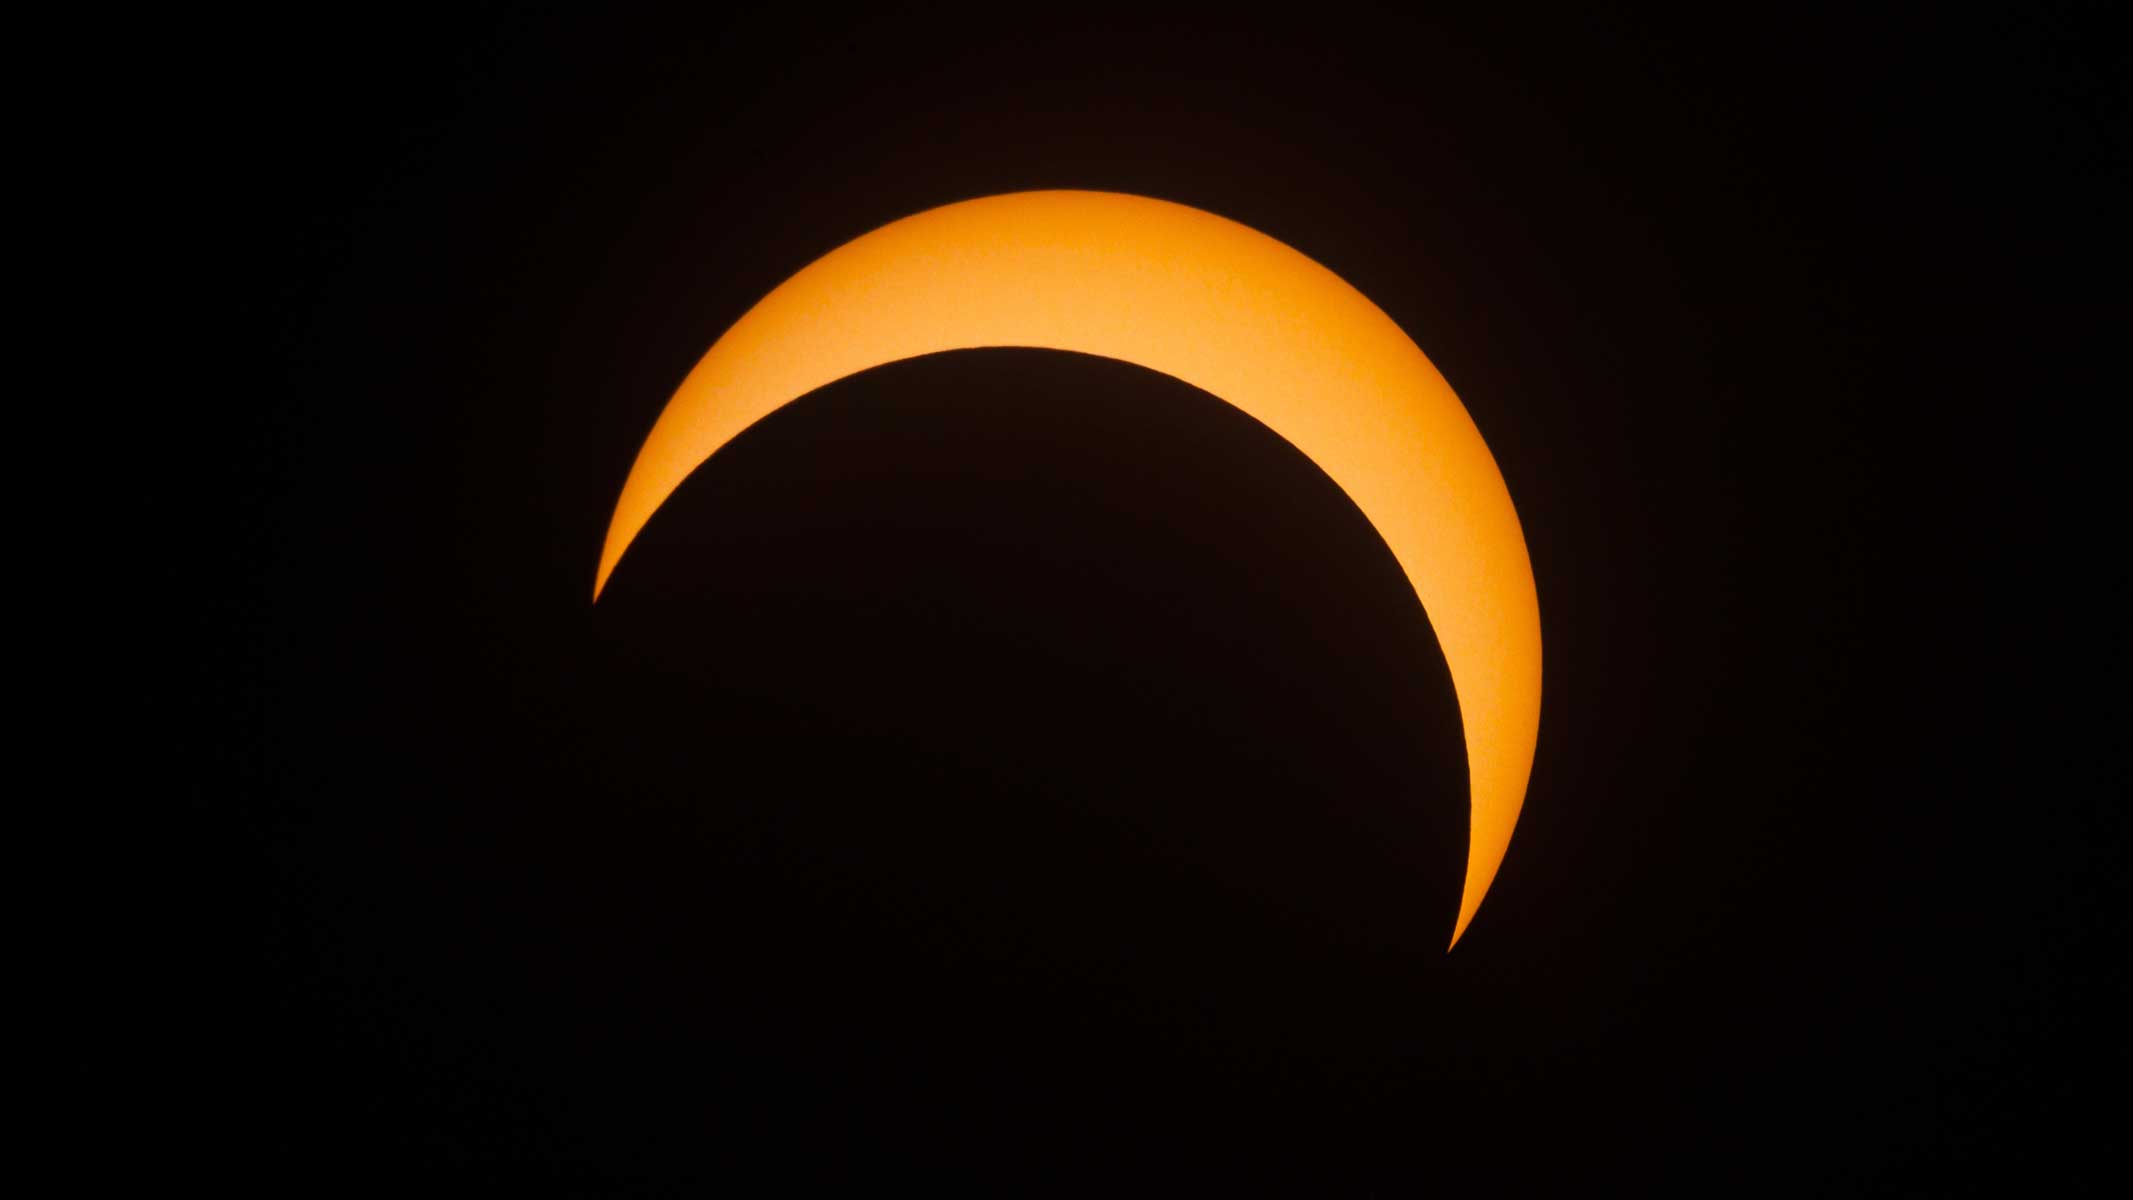 The first solar eclipse of 2022 will happen on April 30.